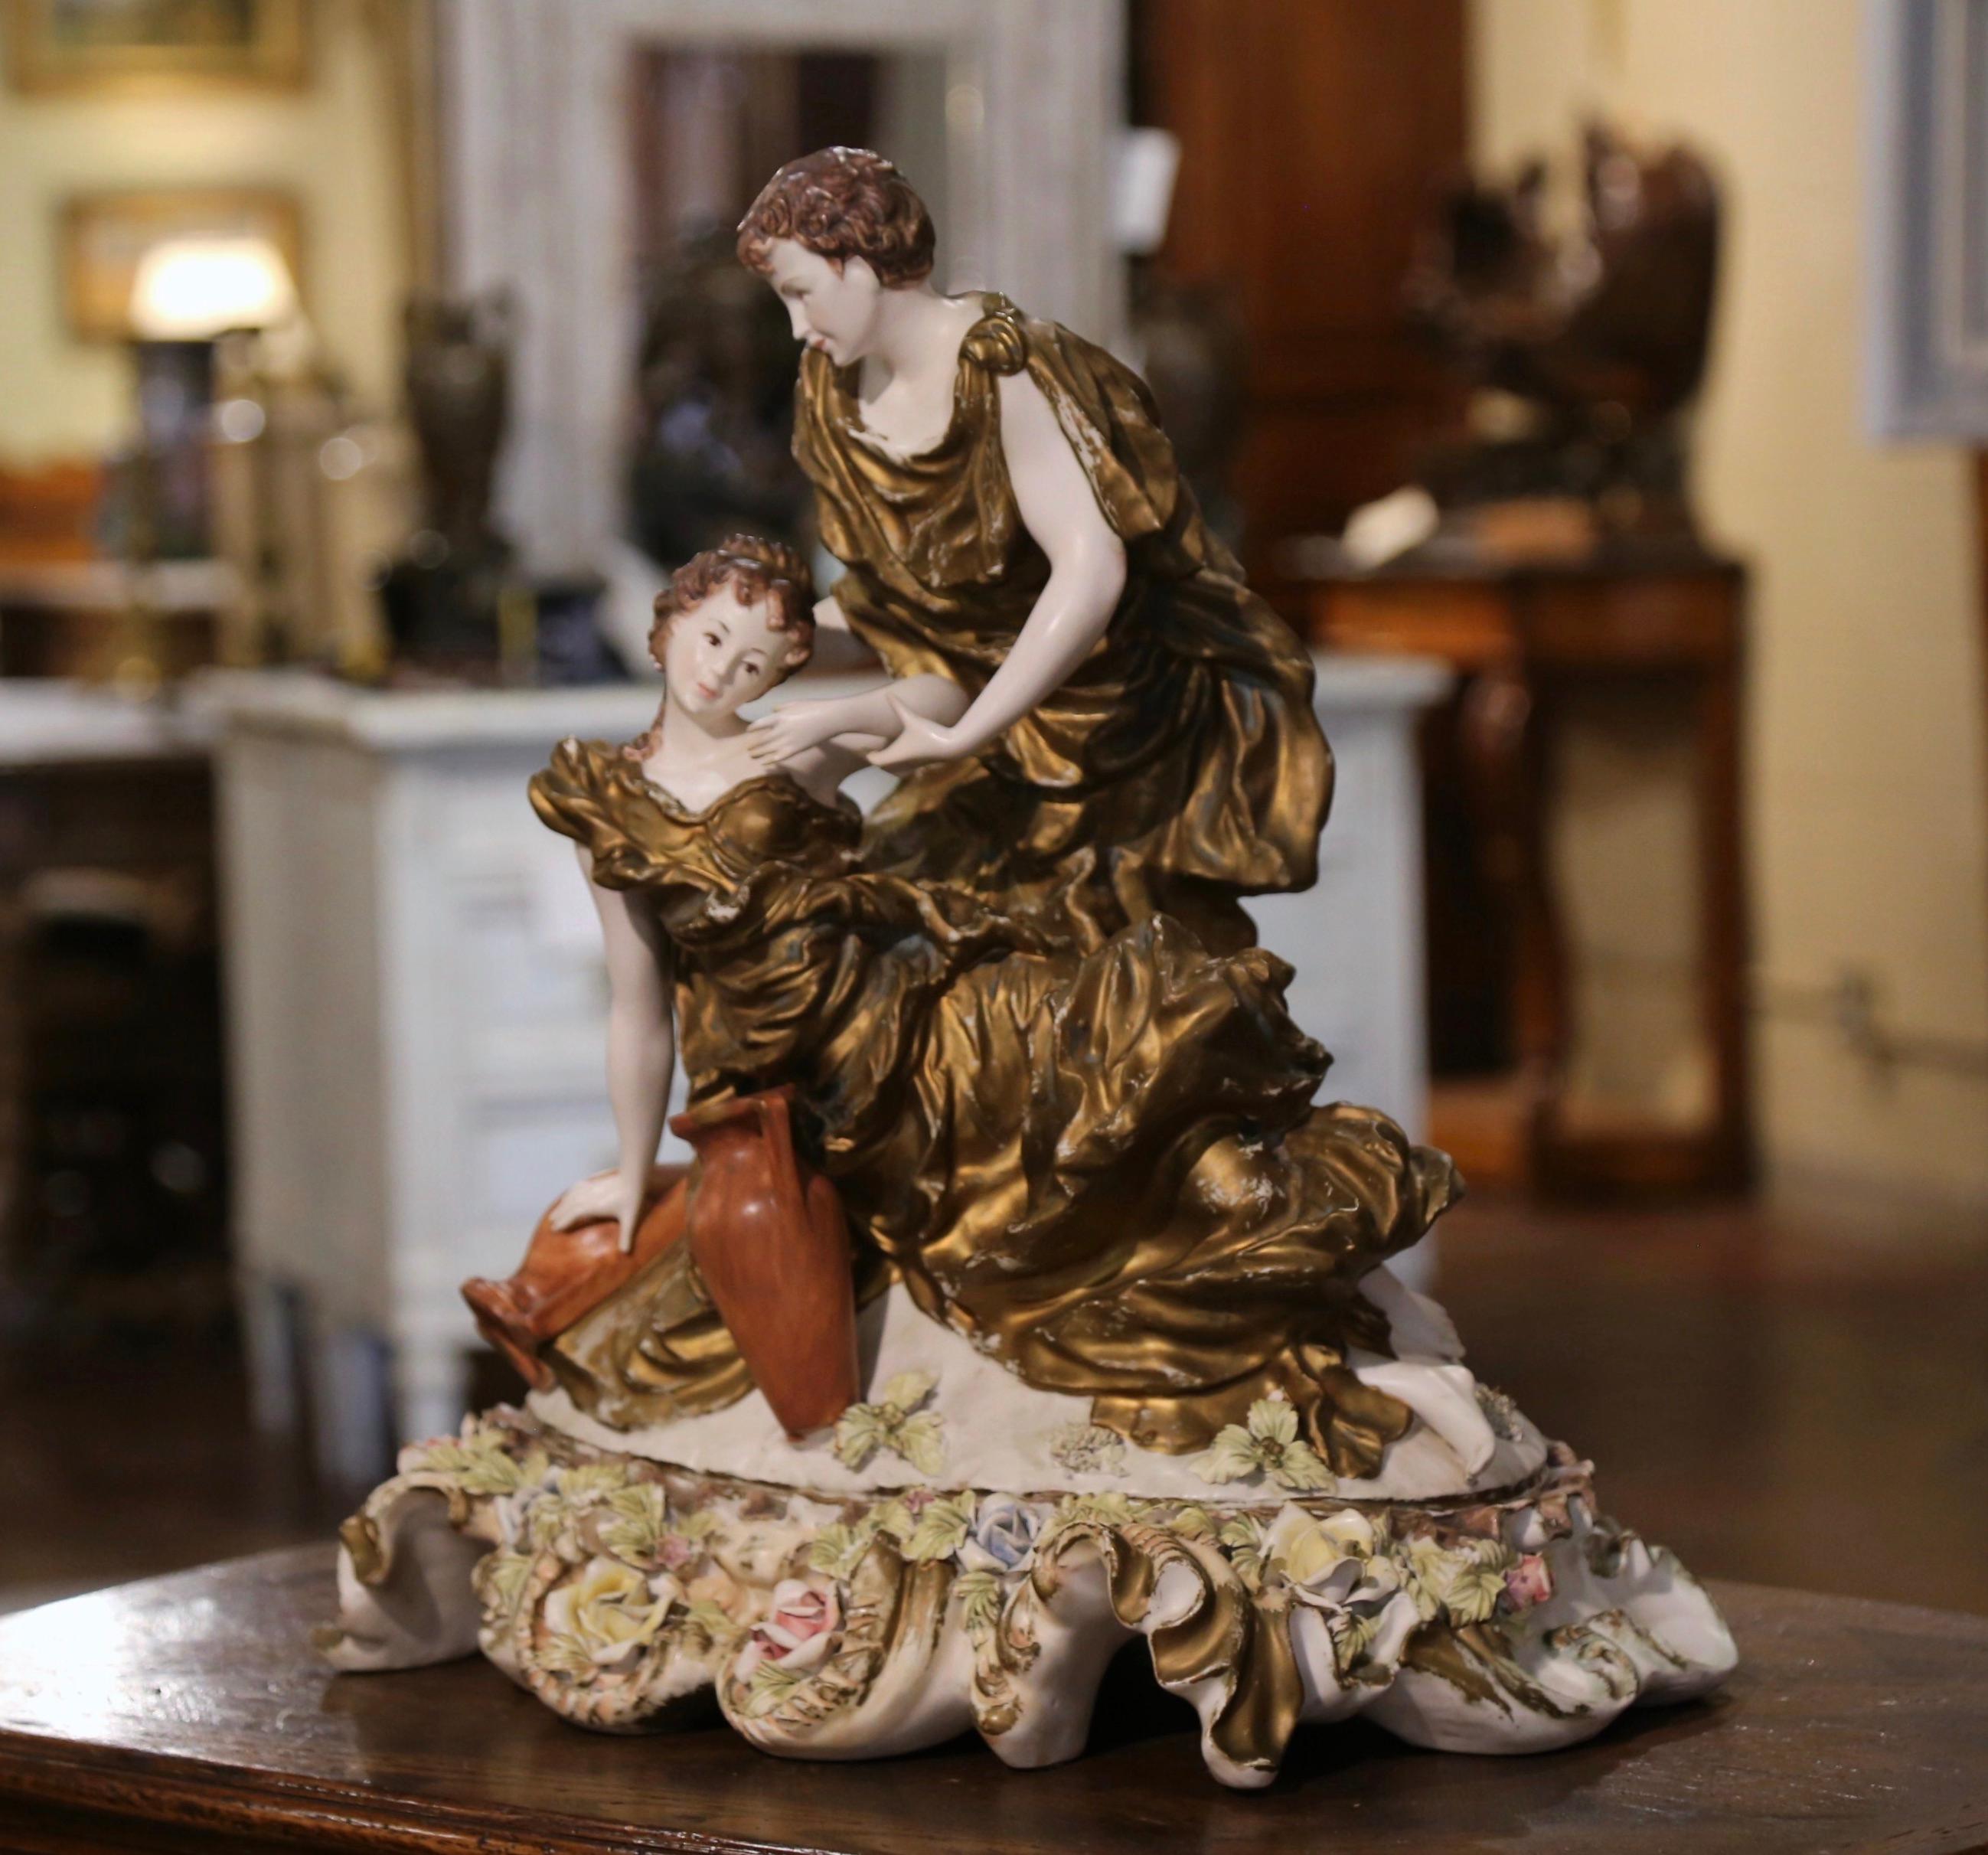 This beautiful majolica figurine would elevate any living room, kitchen, or entry way. Created in Italy circa 1950 and done in the Capodimonte style, the barbotine statue portrays a youthful couple adorned in classical Roman attire. Draped in